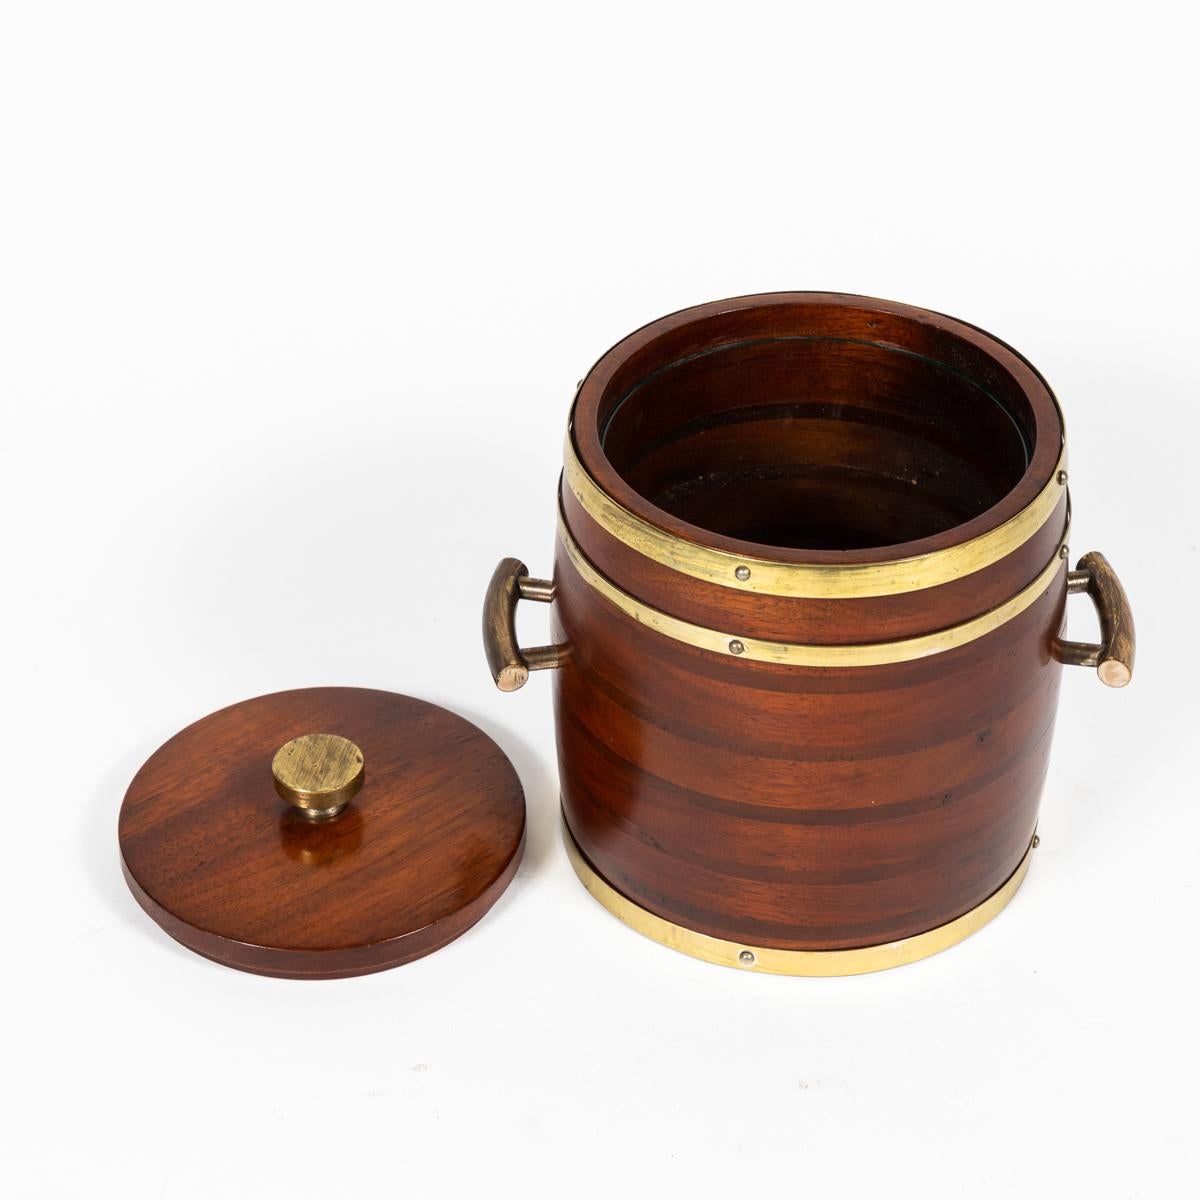 Wooden ice bucket with brass fittings from England circa 1920.